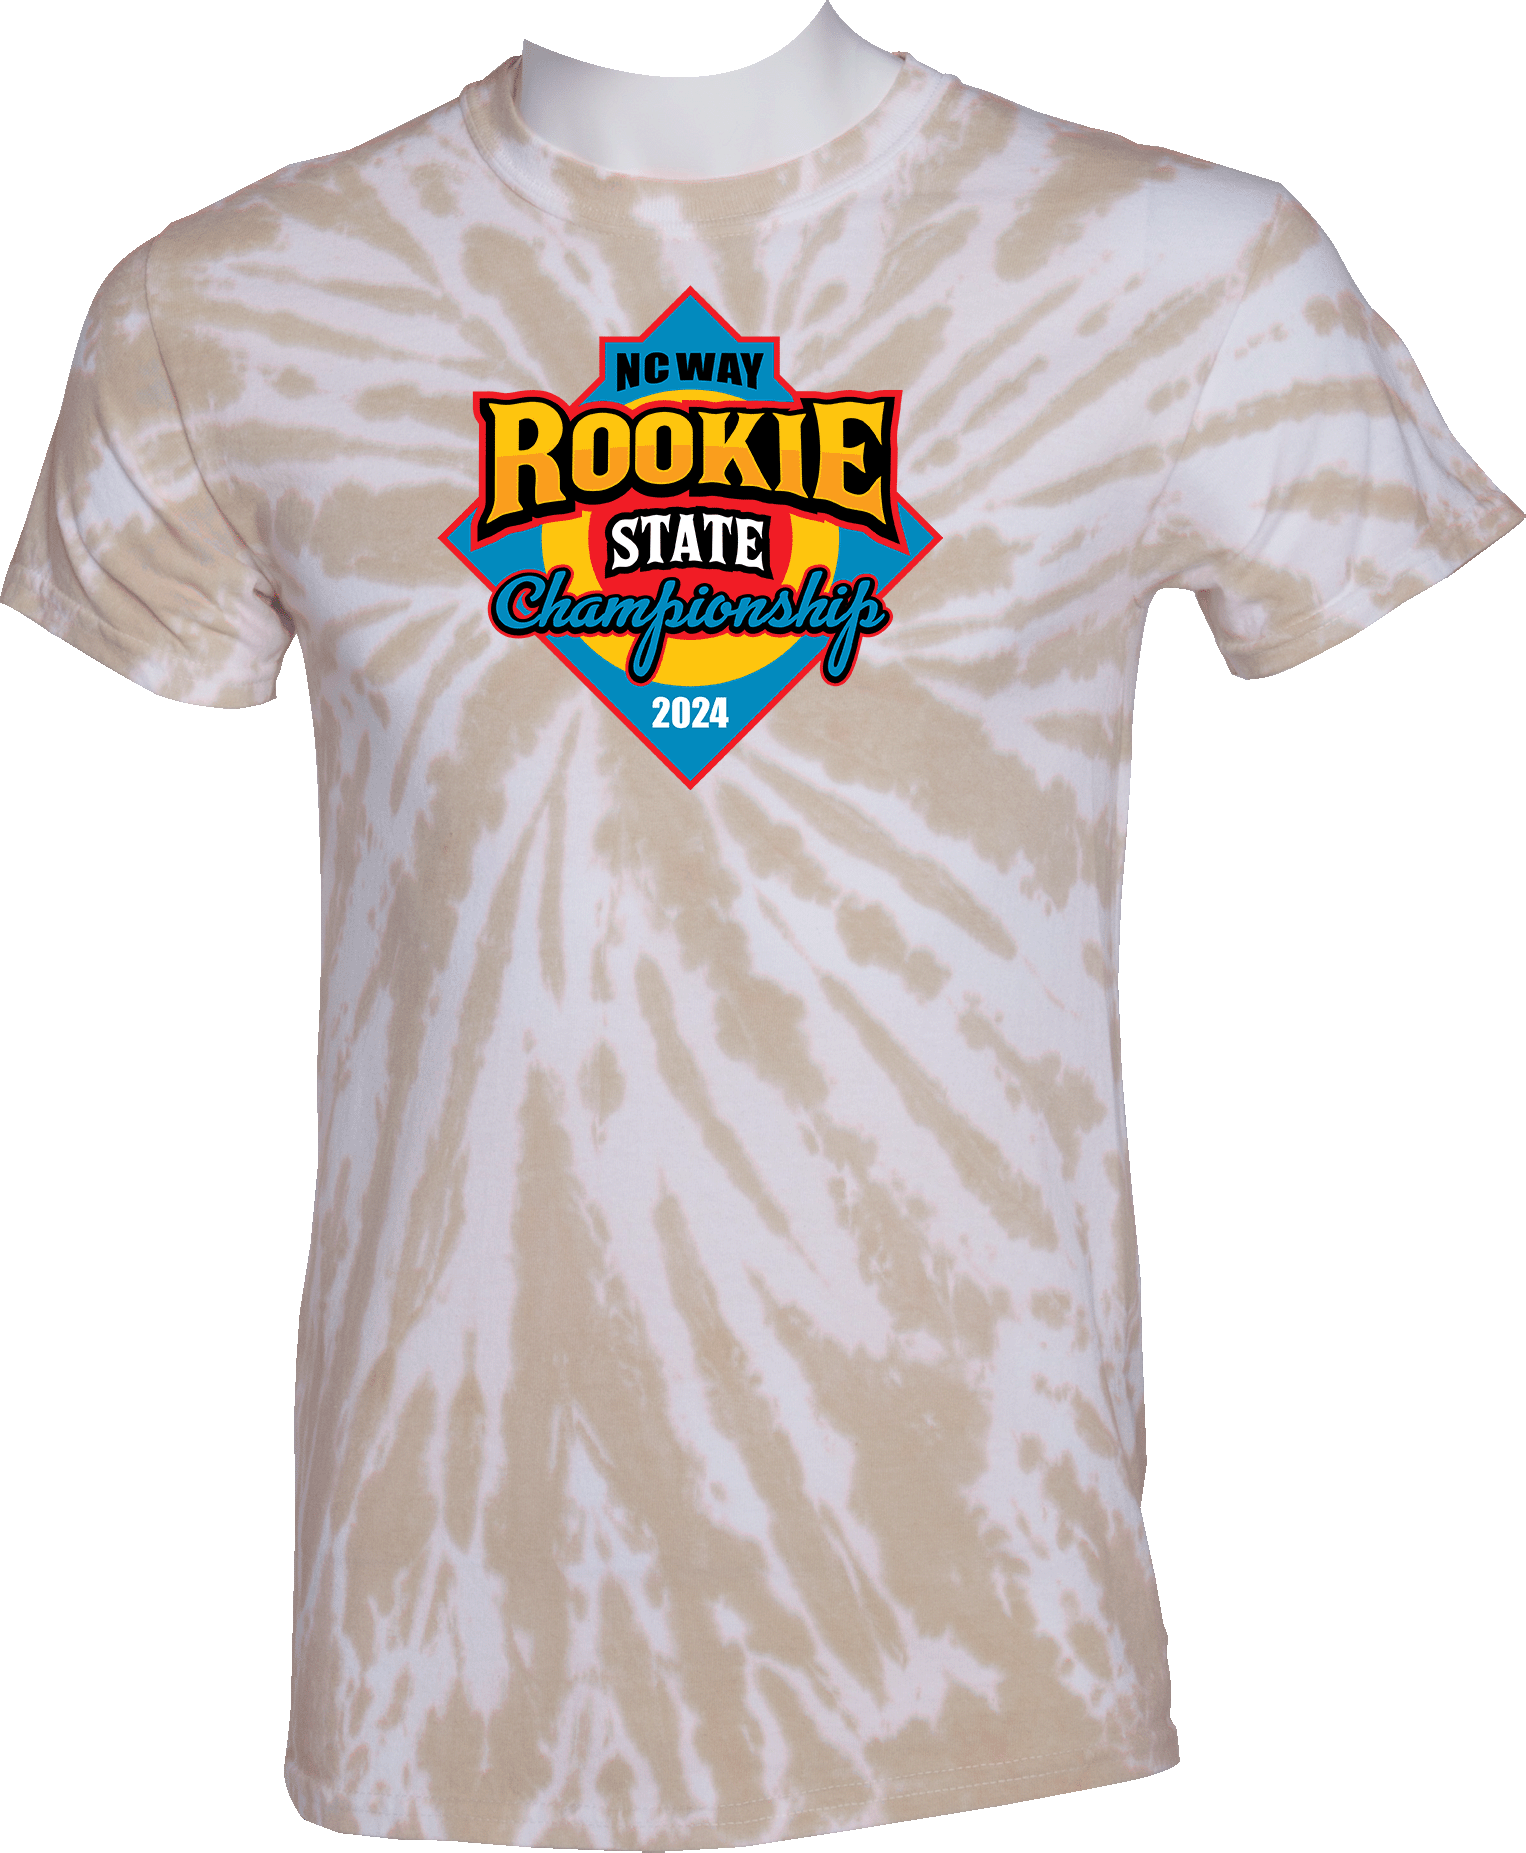 Tie-Dye Short Sleeves - 2024 NCWAY Rookie State Championship